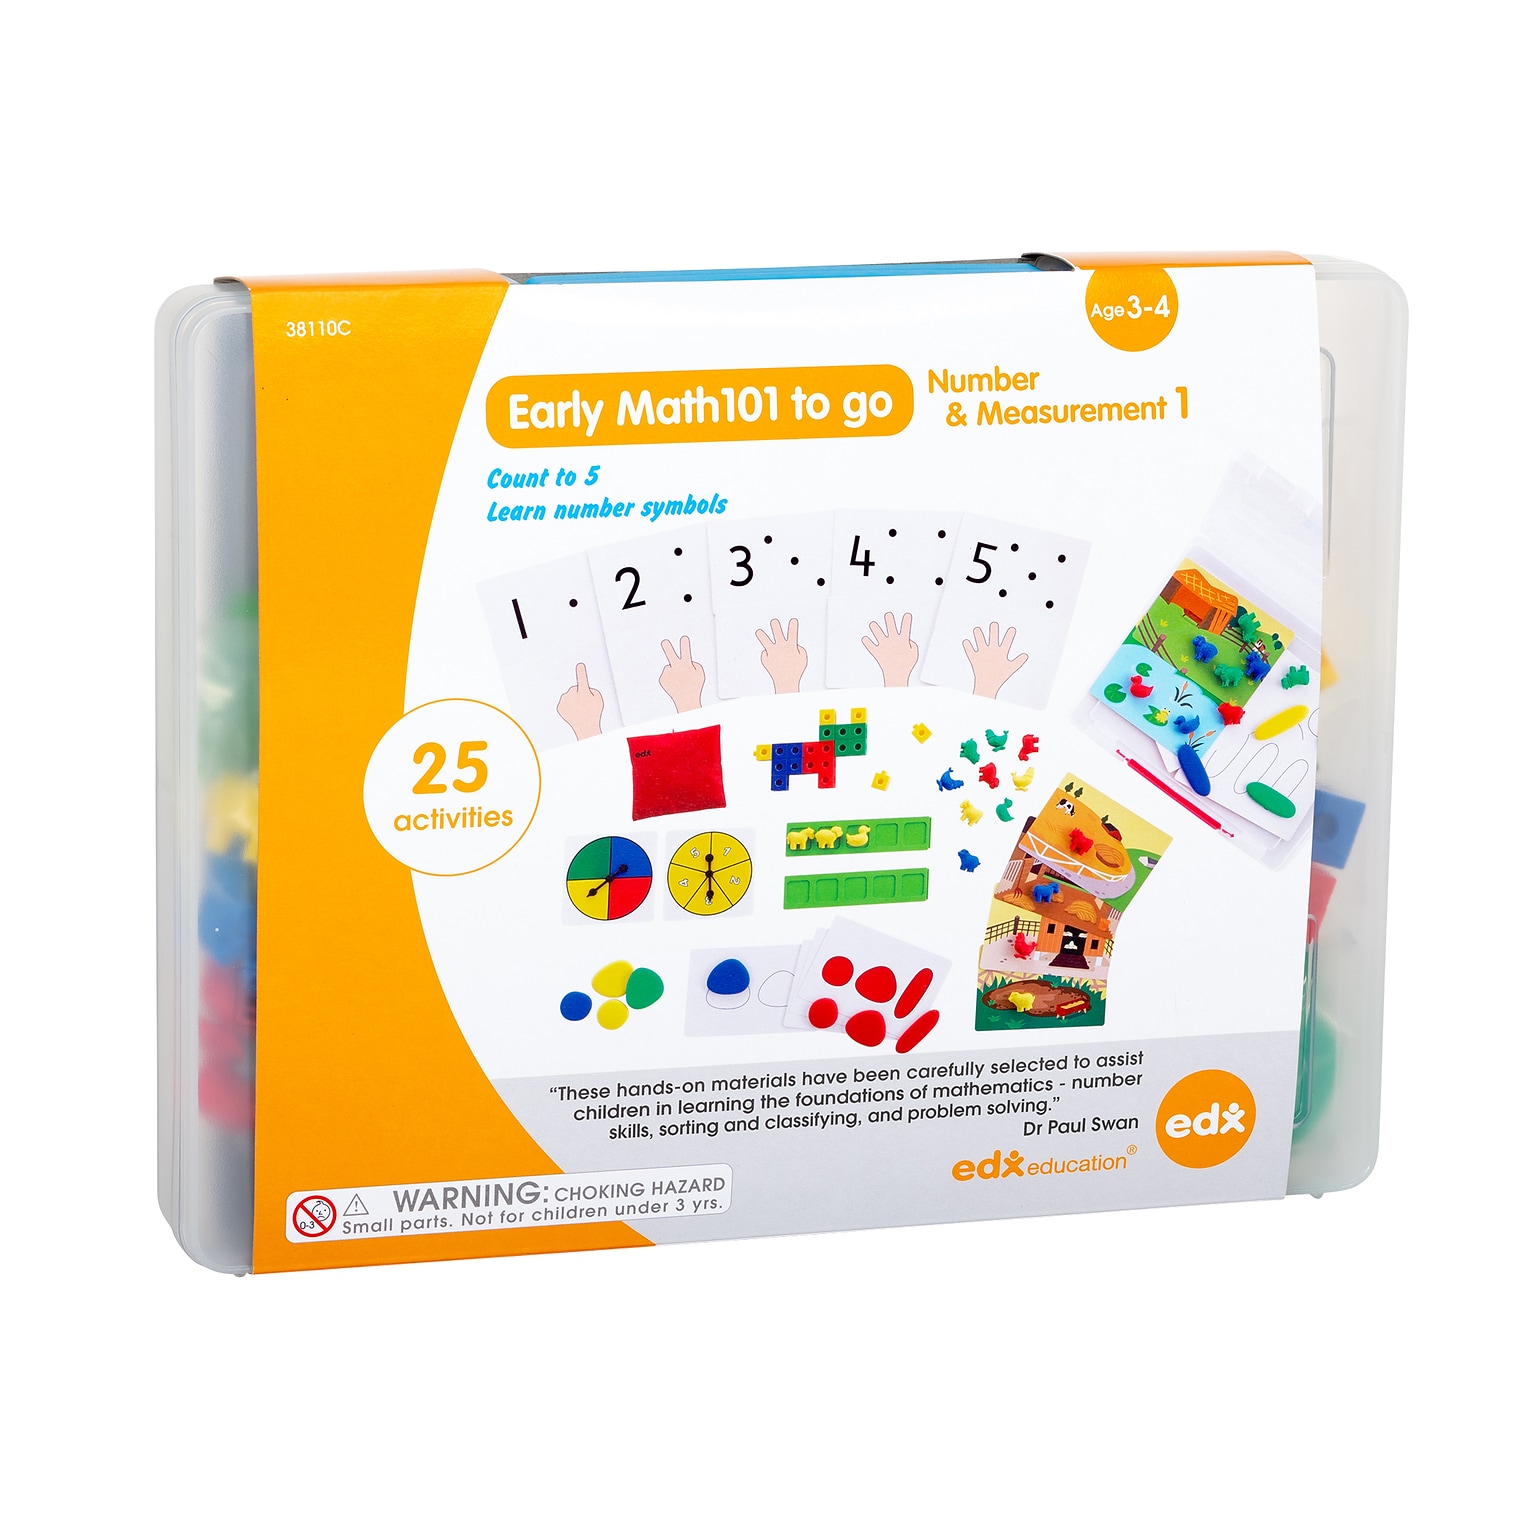 Edx Education® Early Math101 to go, Ages 3-4, Number & Measurement, 25+ Guided Activities (CTU38110)